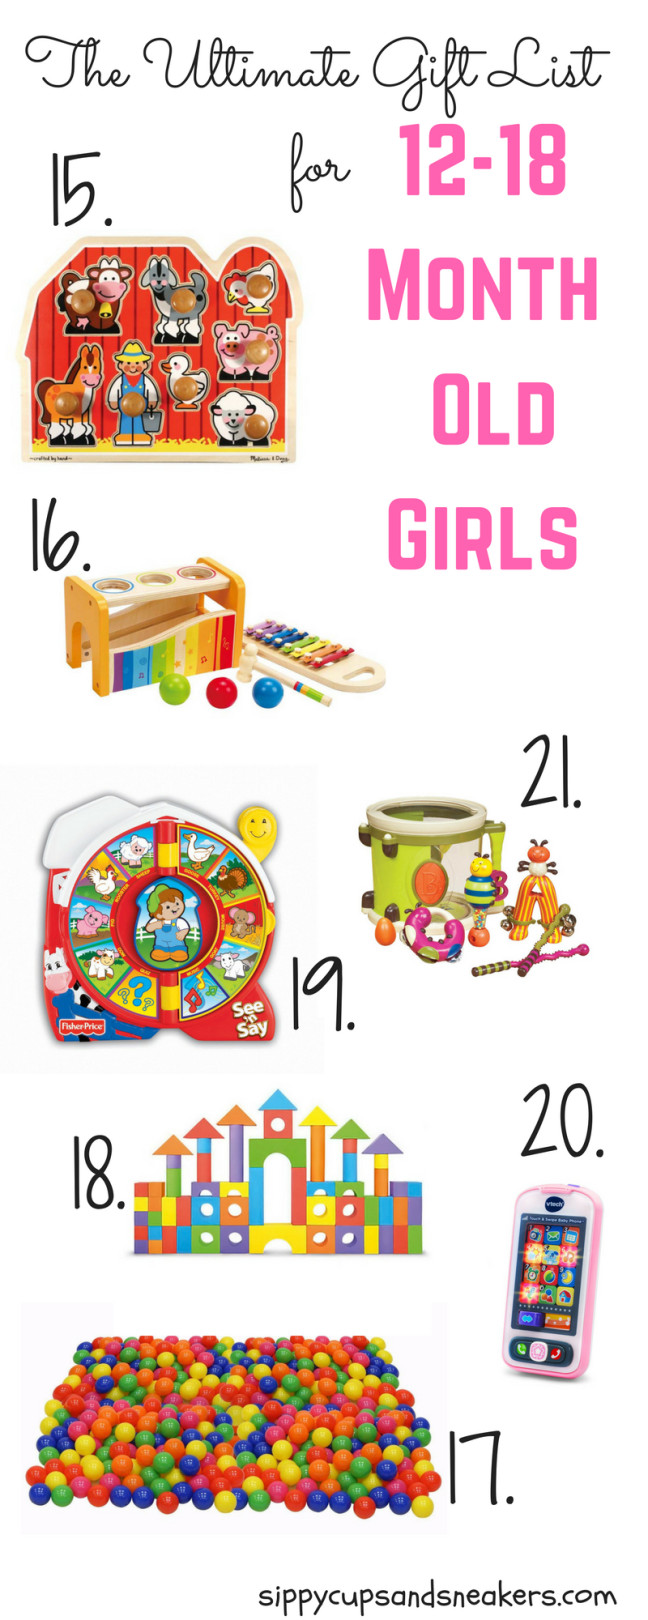 Christmas Gift Ideas For 18 Month Old Girl
 The Ultimate Gift List for 12 18 Month Old Girls